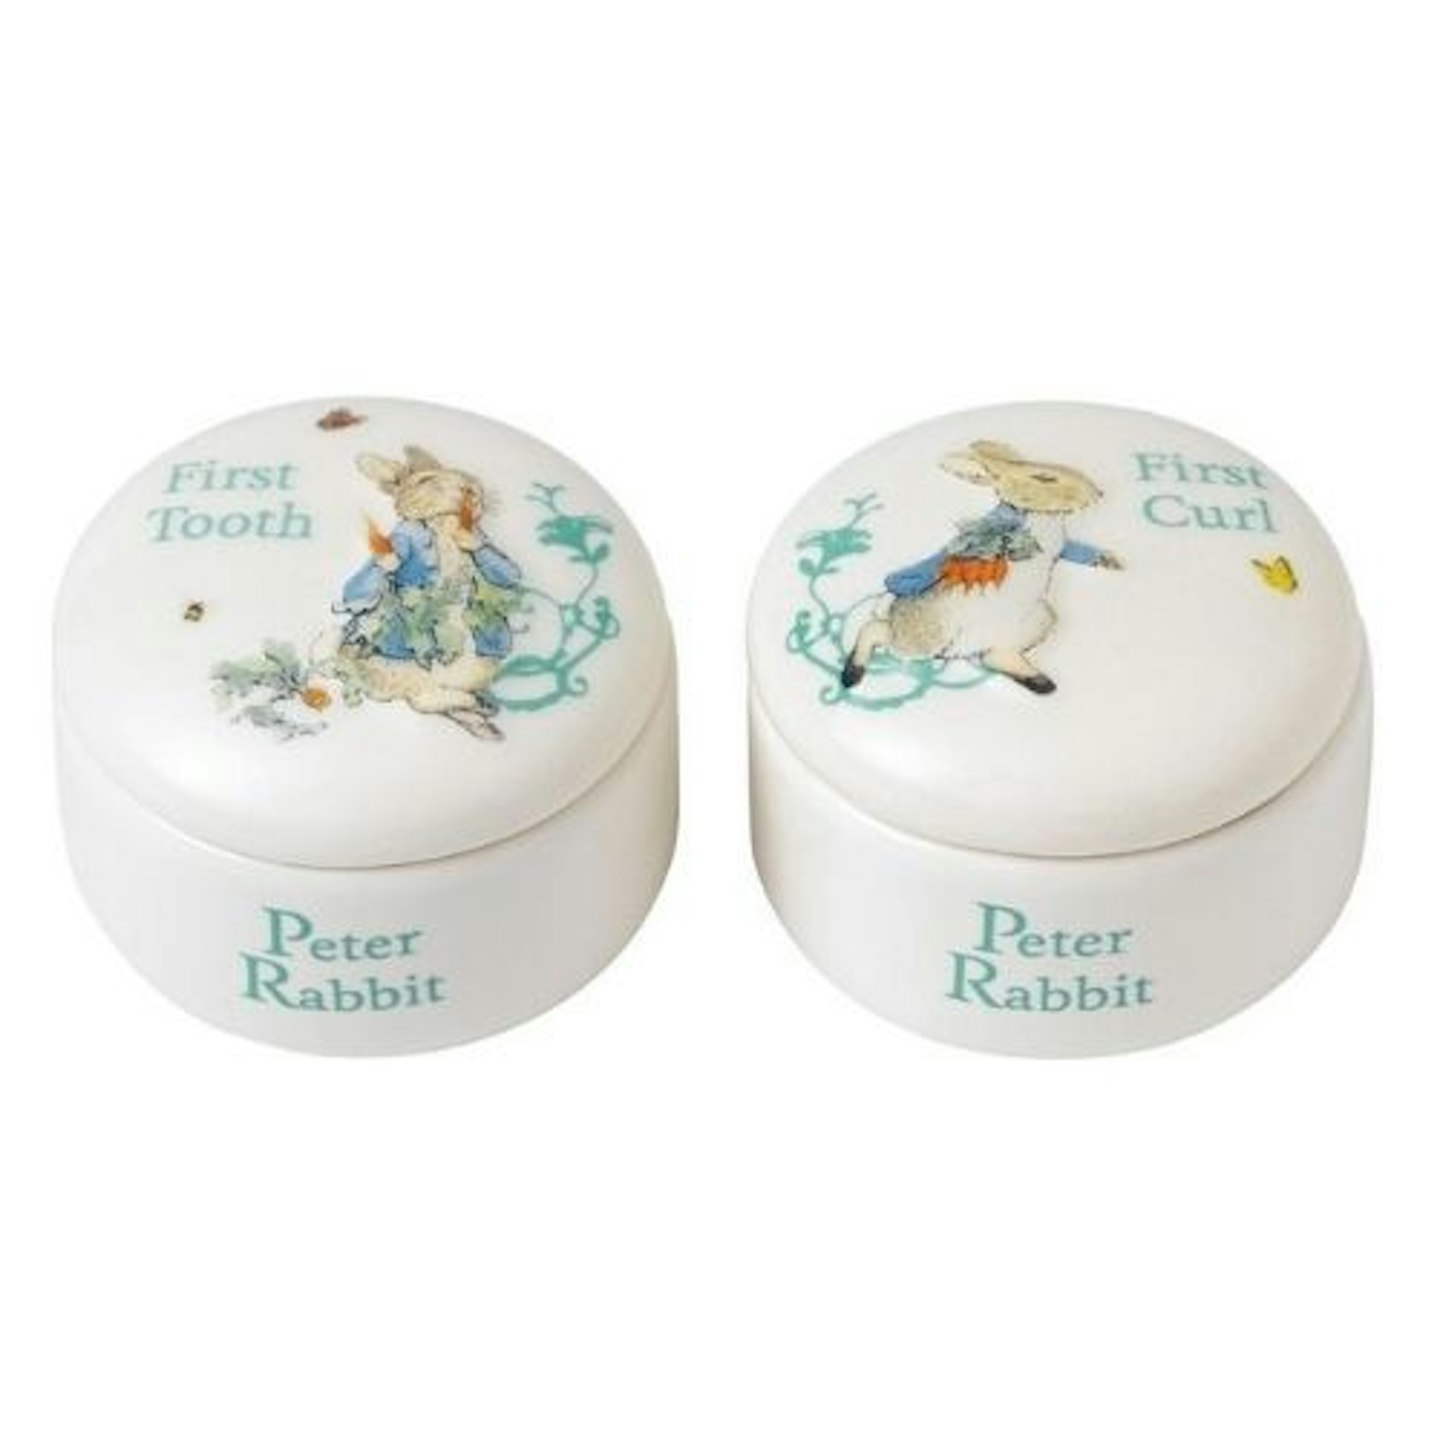 Peter Rabbit First Tooth and Curl Box